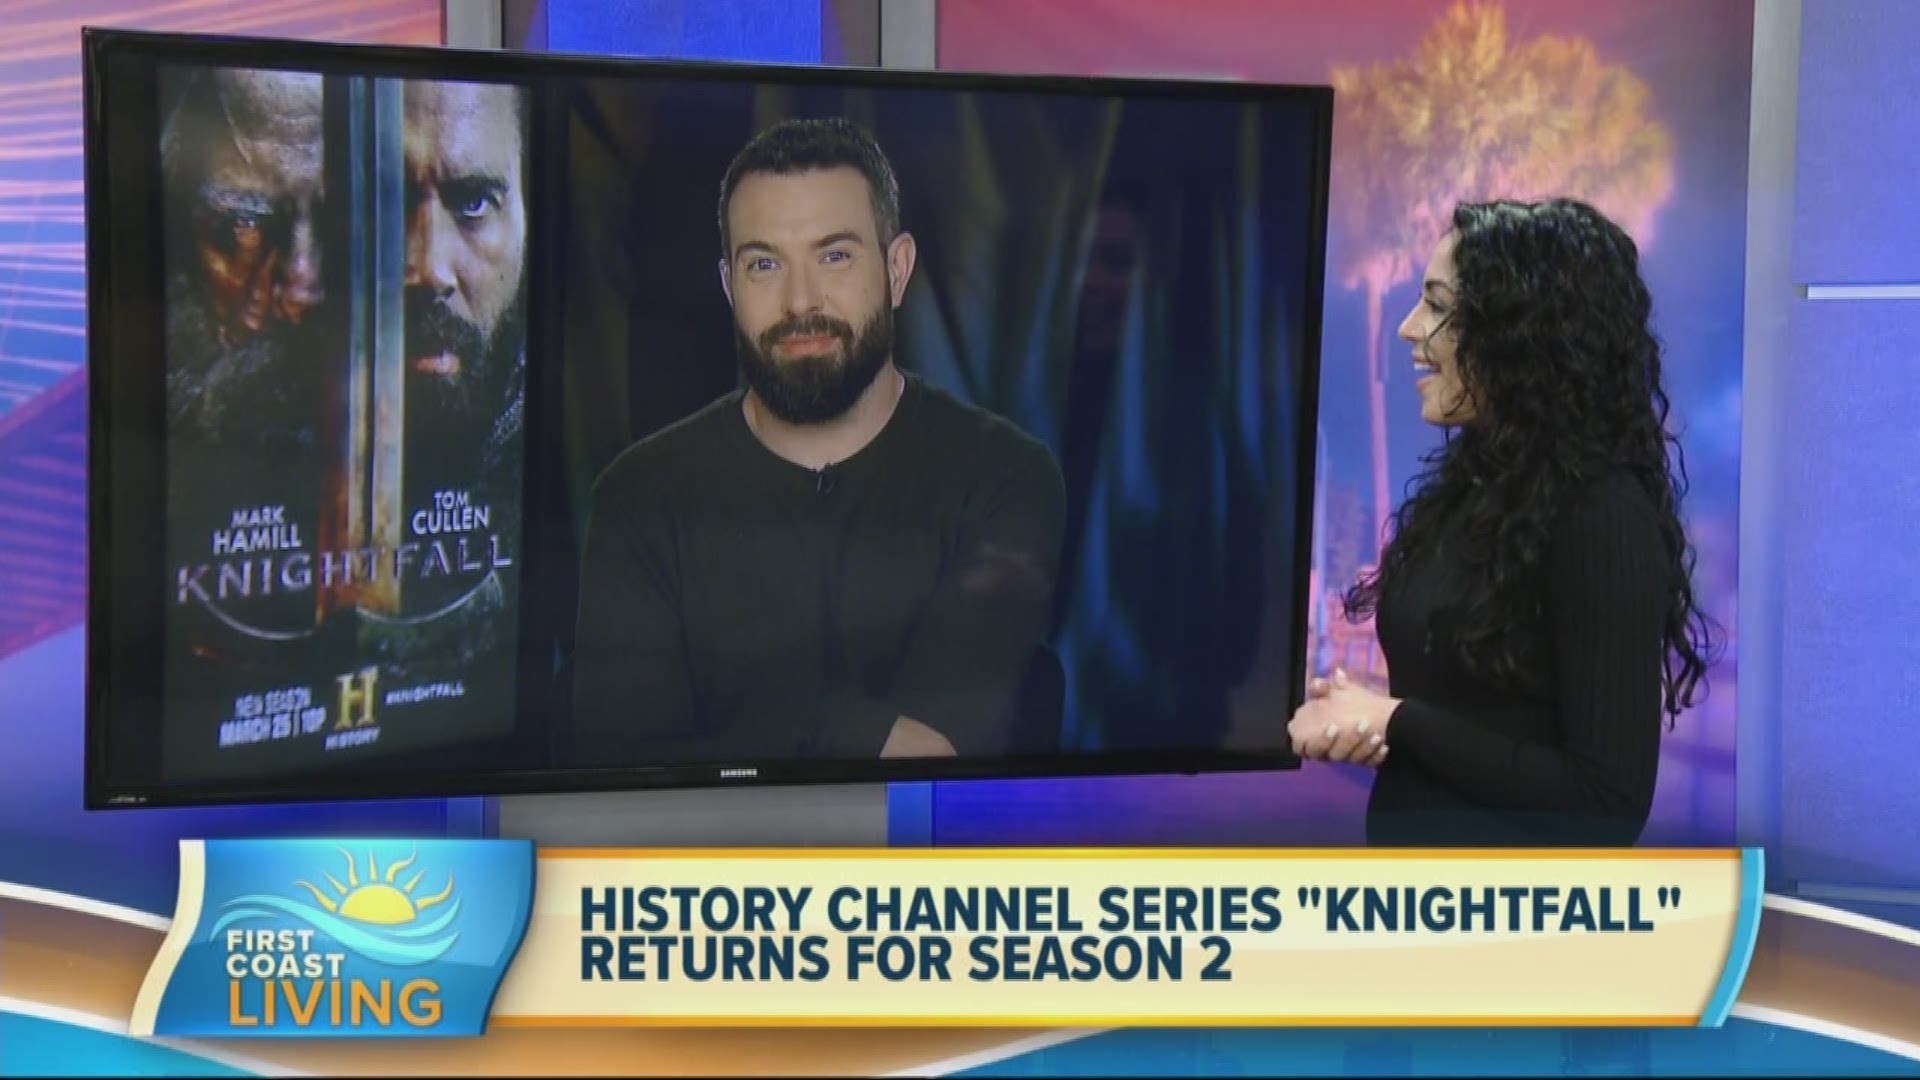 'Knightfall' star Tom Cullen shares details of the season two debut of the series with Haddie Djemal.